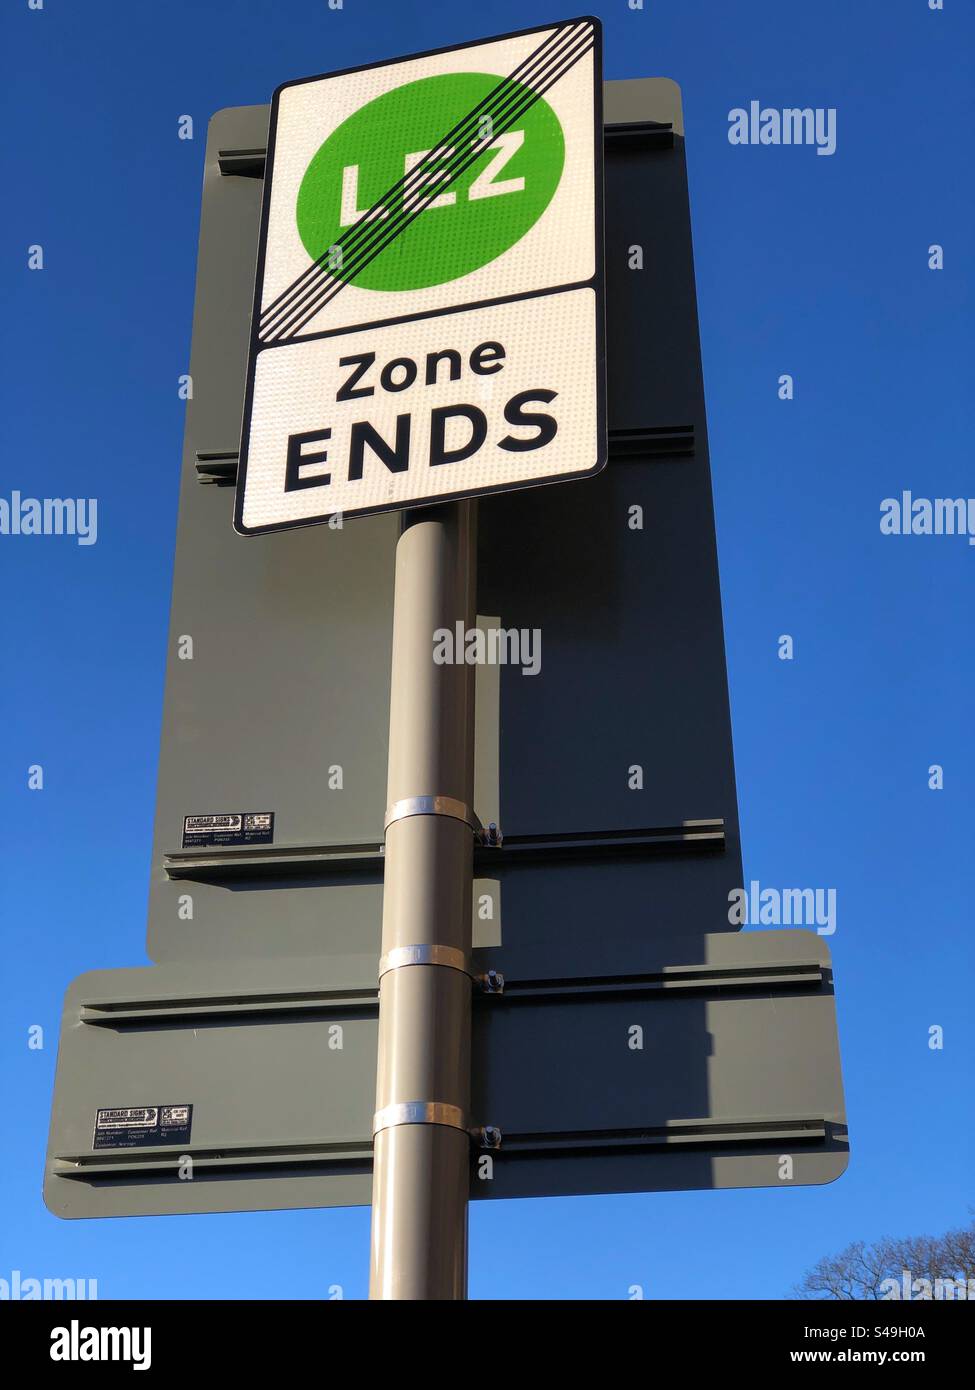 Ulez restrictions zone ends sign Stock Photo